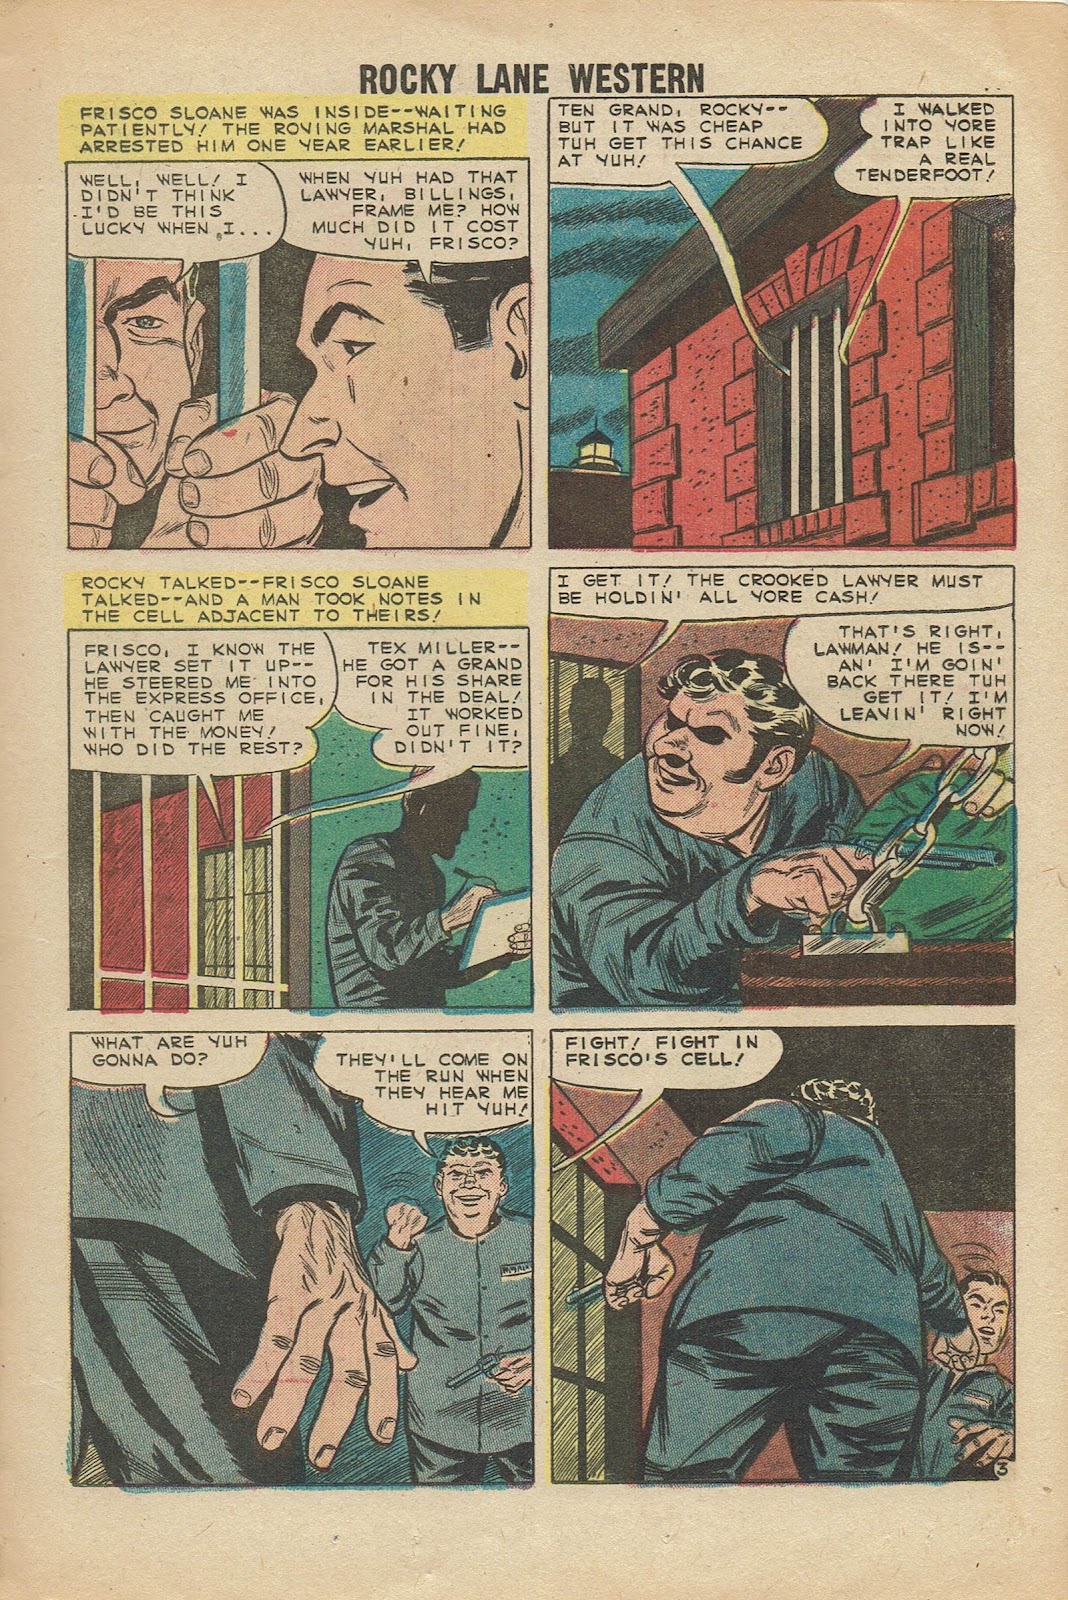 Rocky Lane Western (1954) issue 85 - Page 17